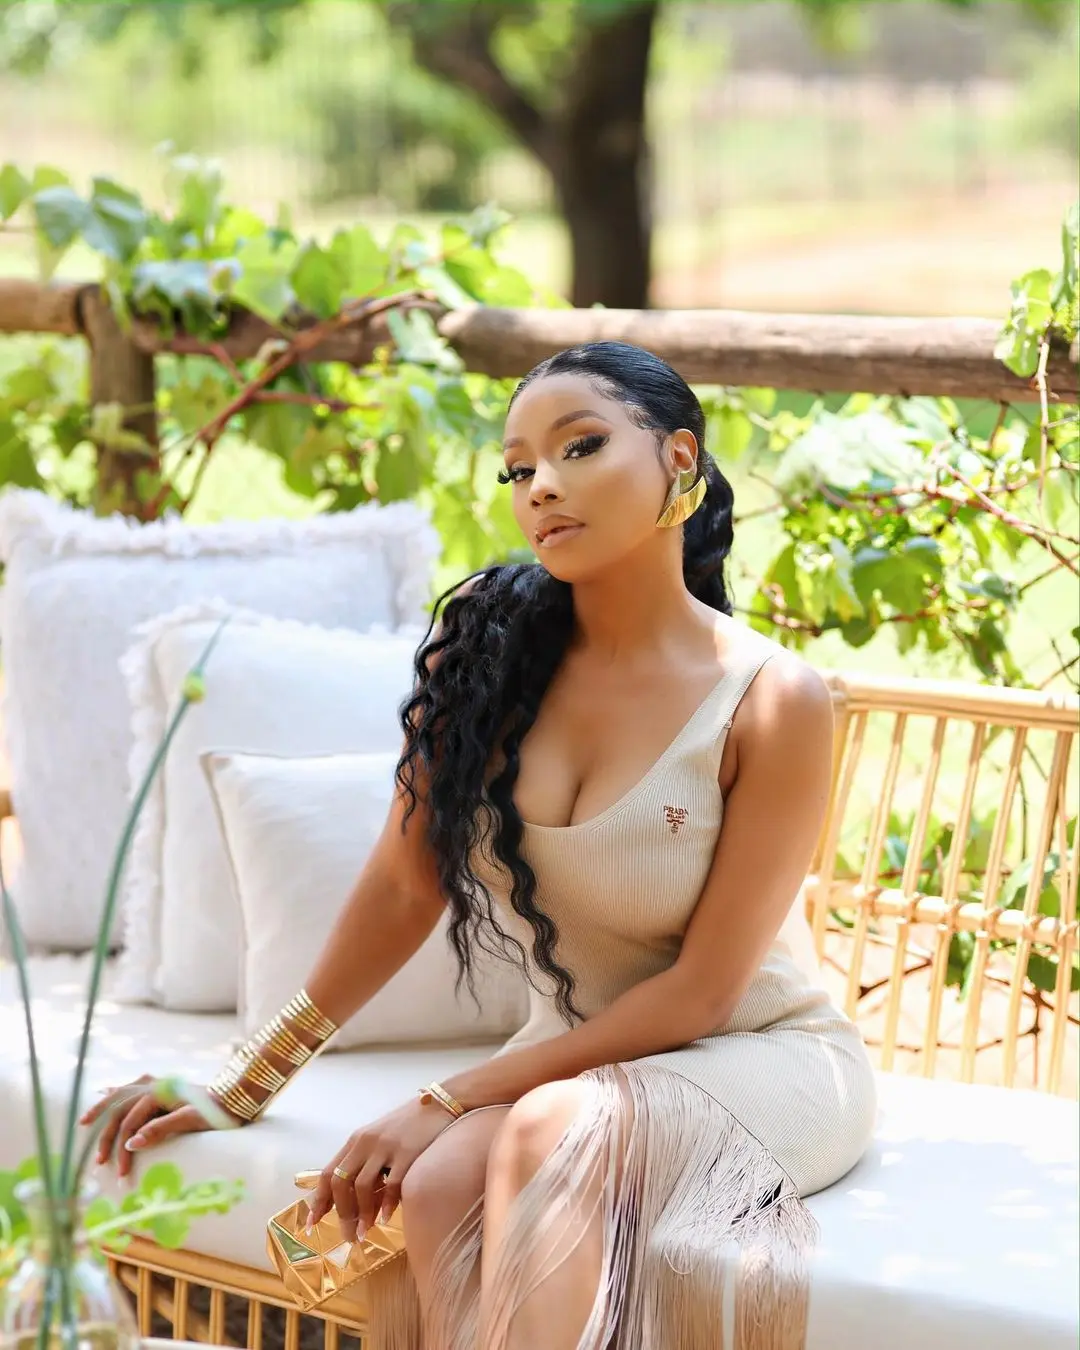 Bonang Matheba to feature in the Netflix series Young, Famous & African